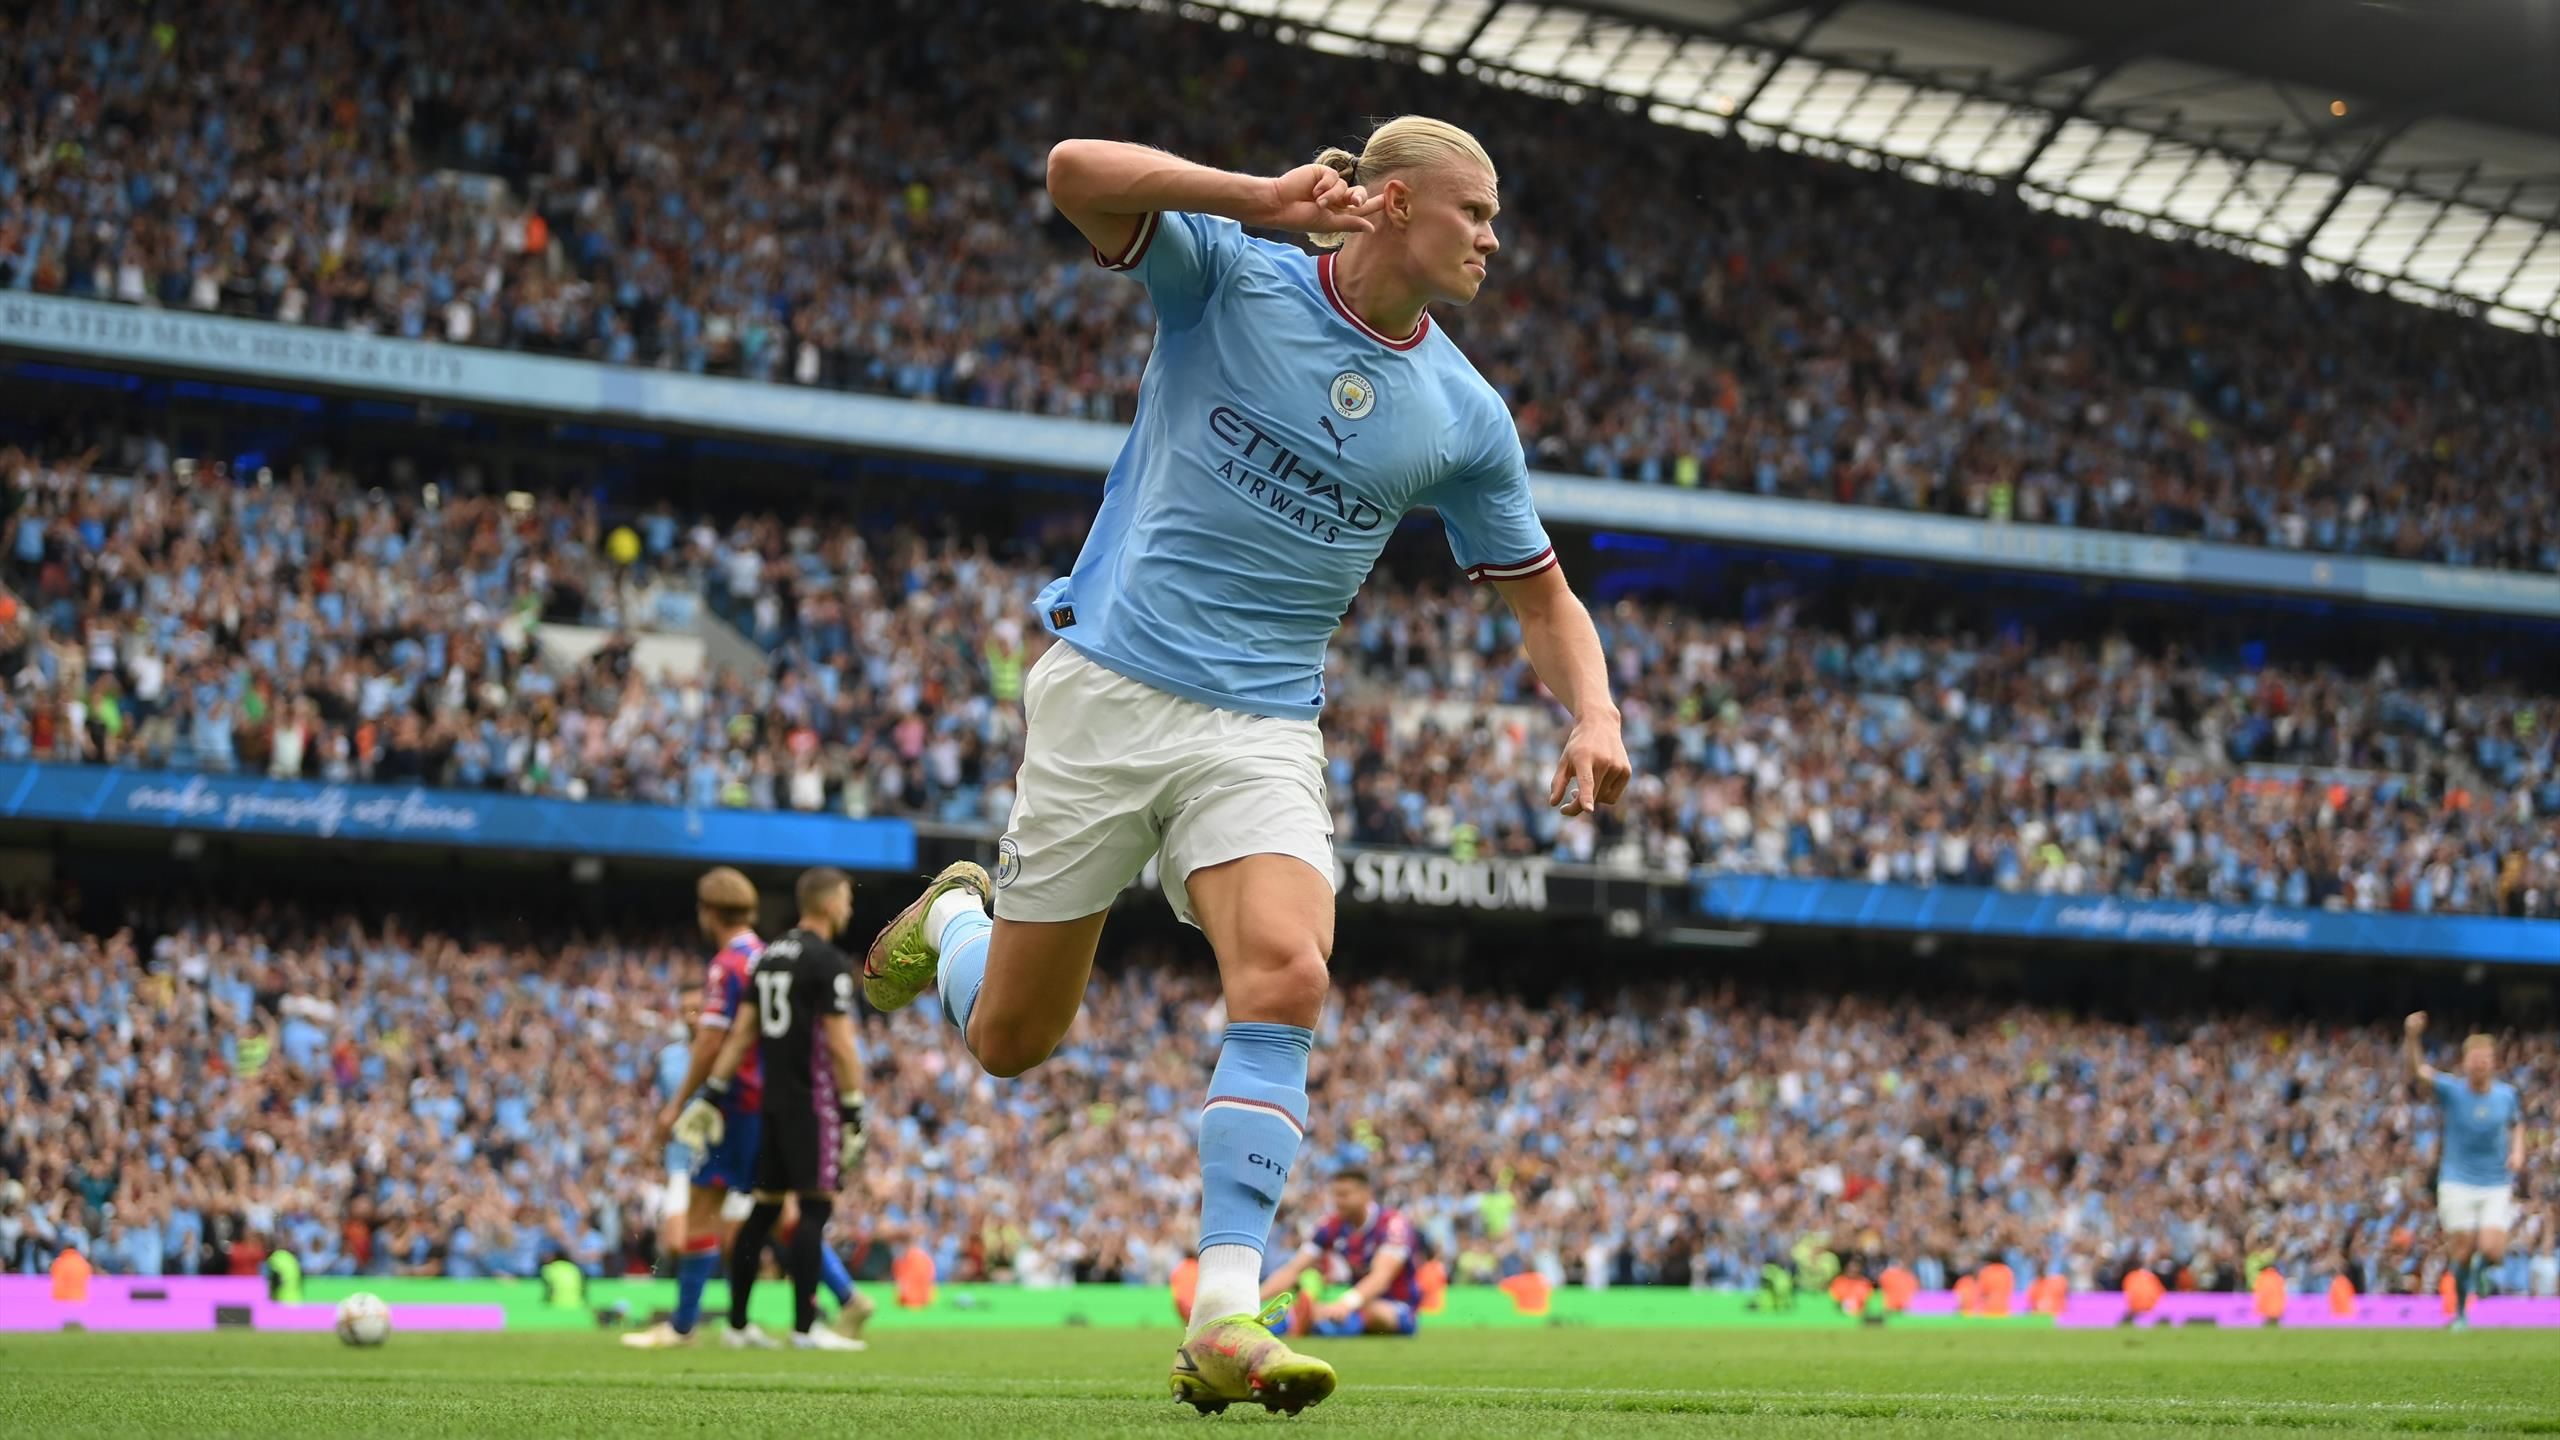 Erling Haaland: Manchester City Star Says He Will 'get Even Better' After First Premier League Hat Trick